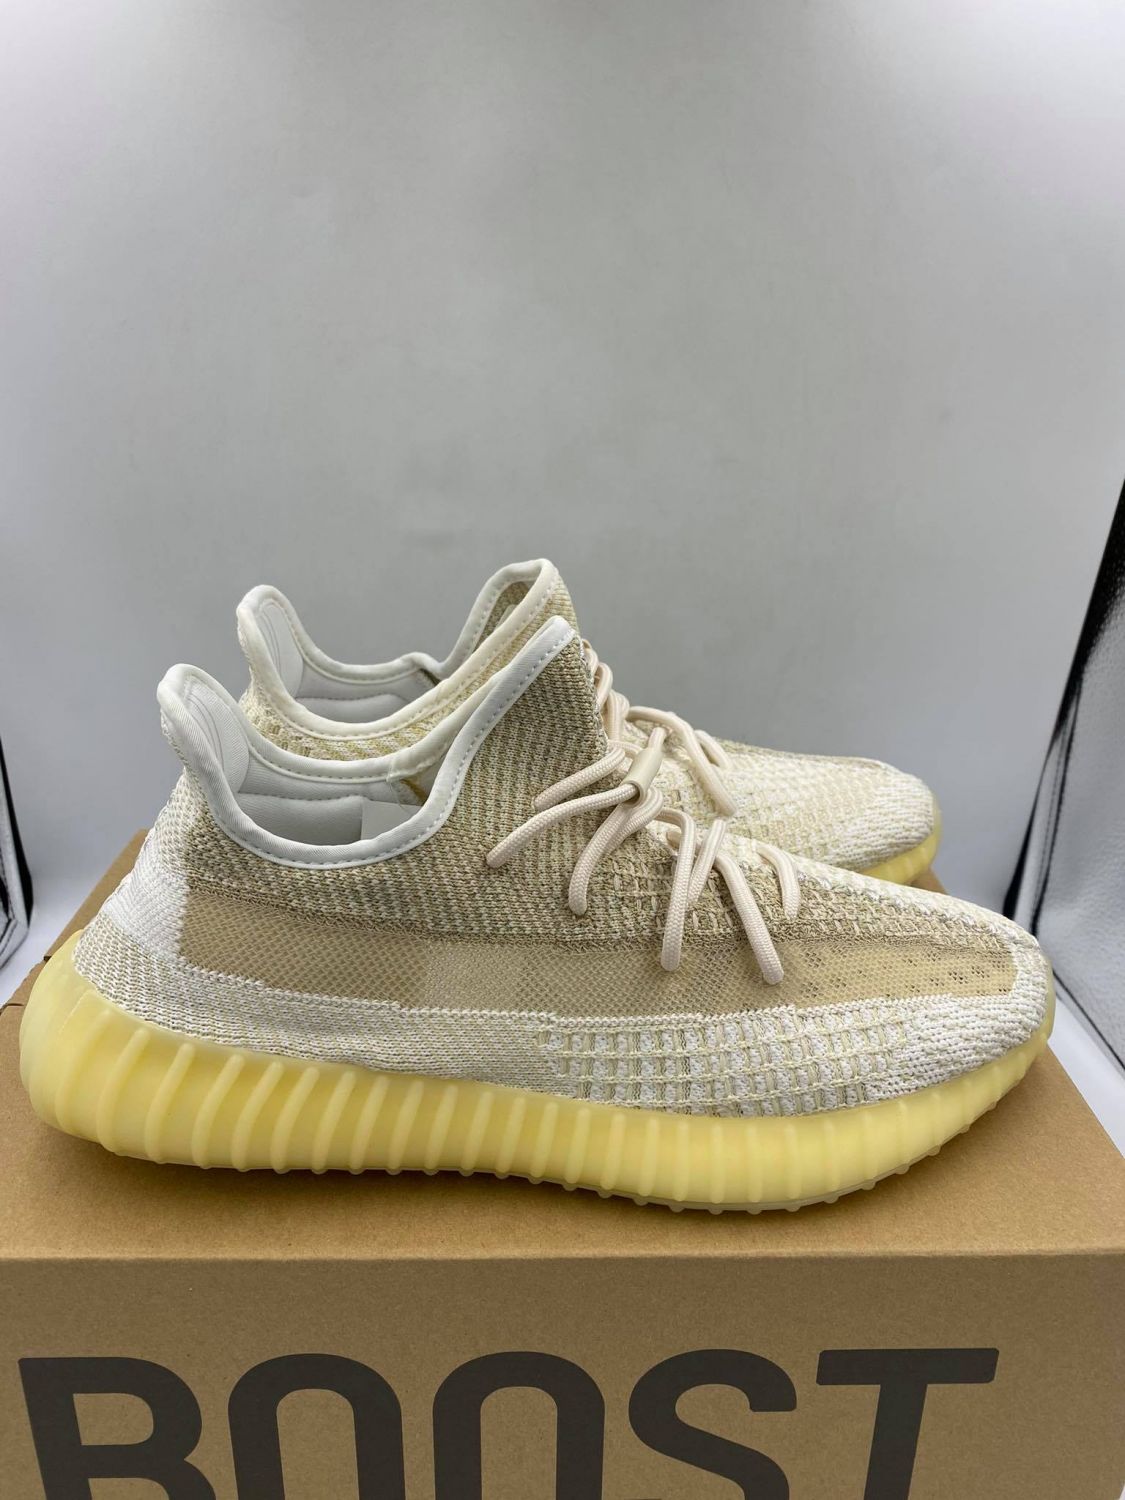 Adidas Yeezy Boost 350 V2 Natural | AfterMarket